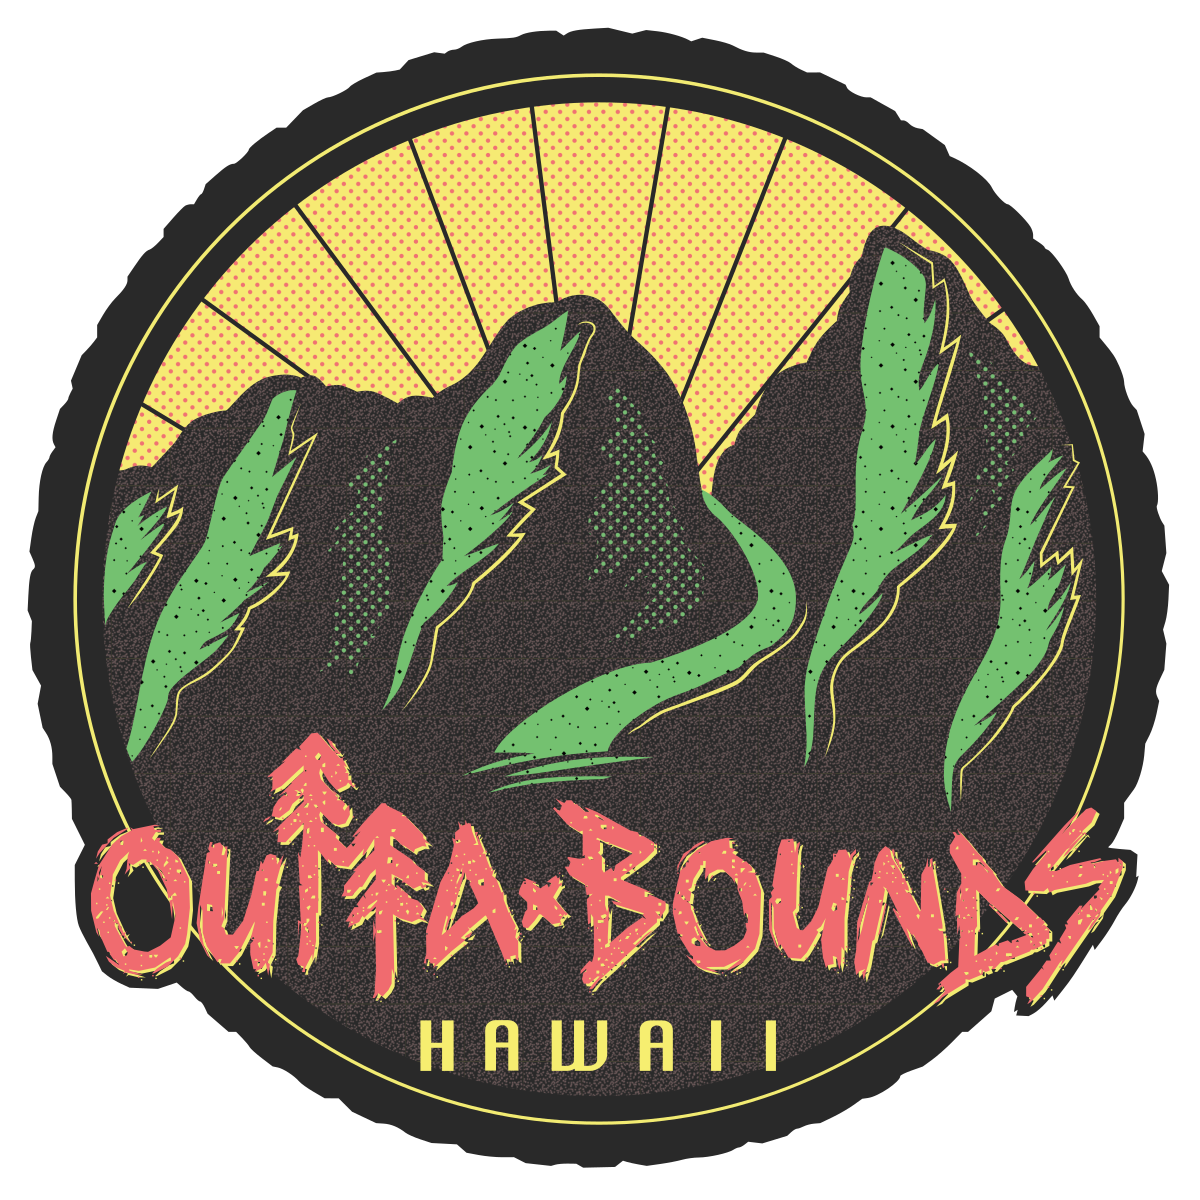 The Outta Bounds Hawaii logo